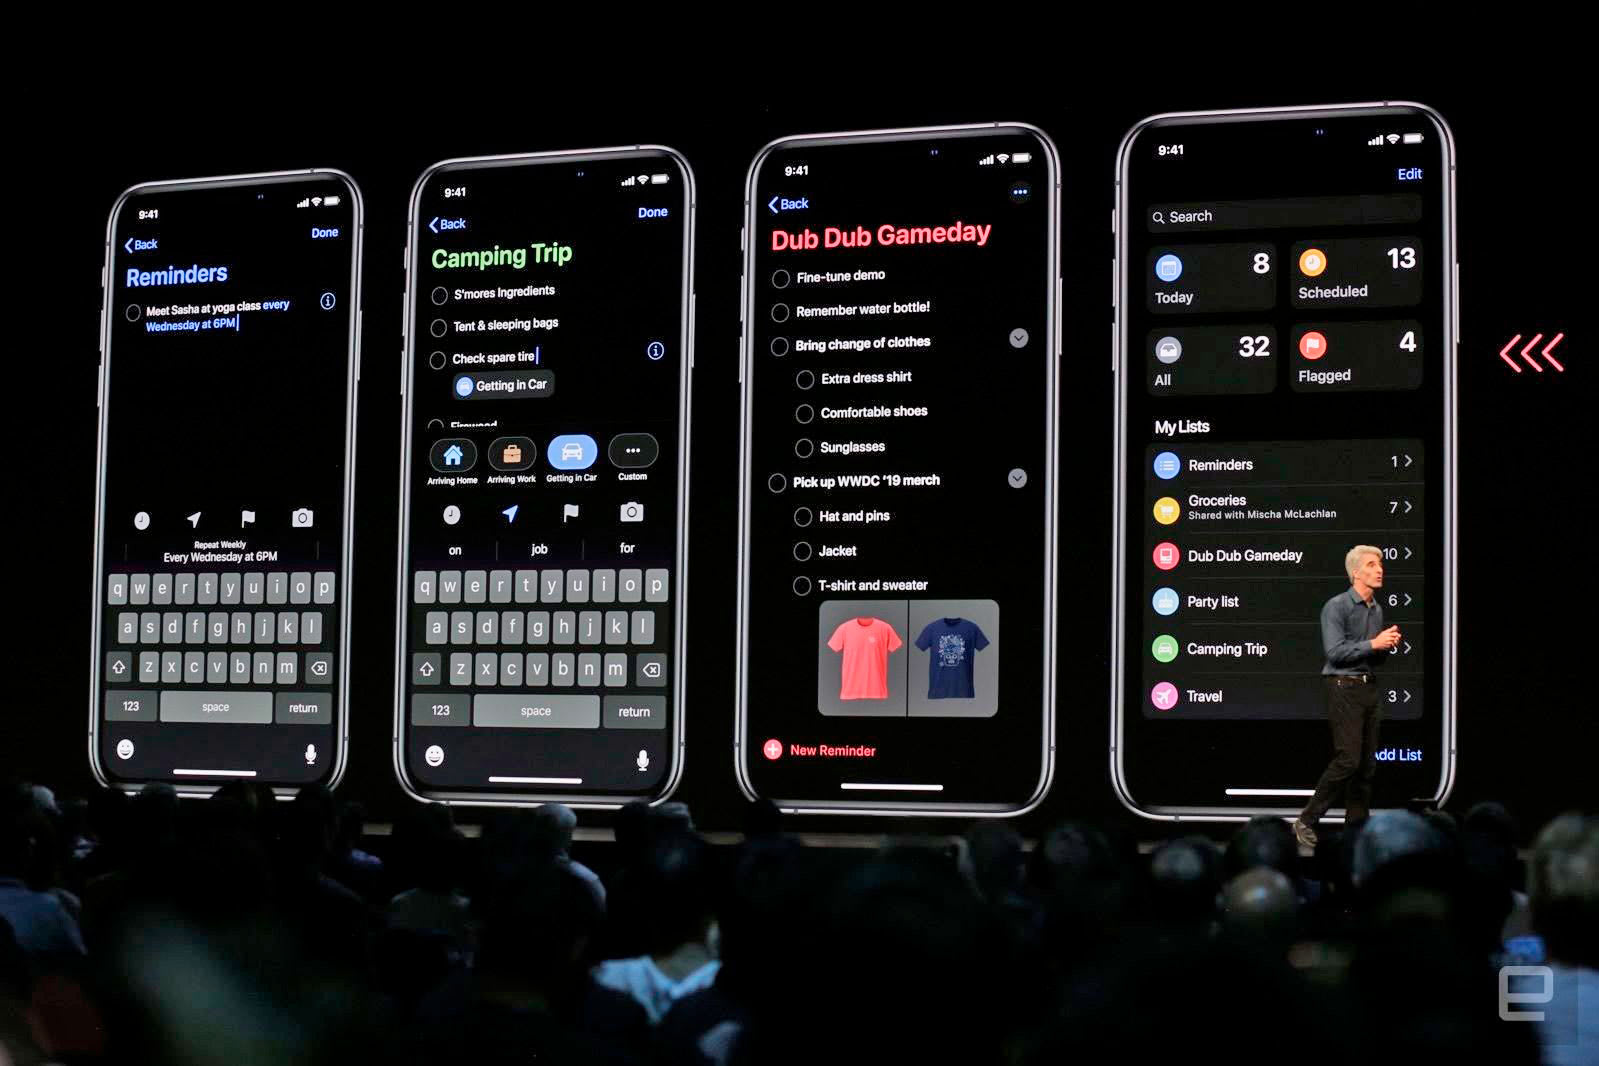 iOS 13 will be available on September 19th